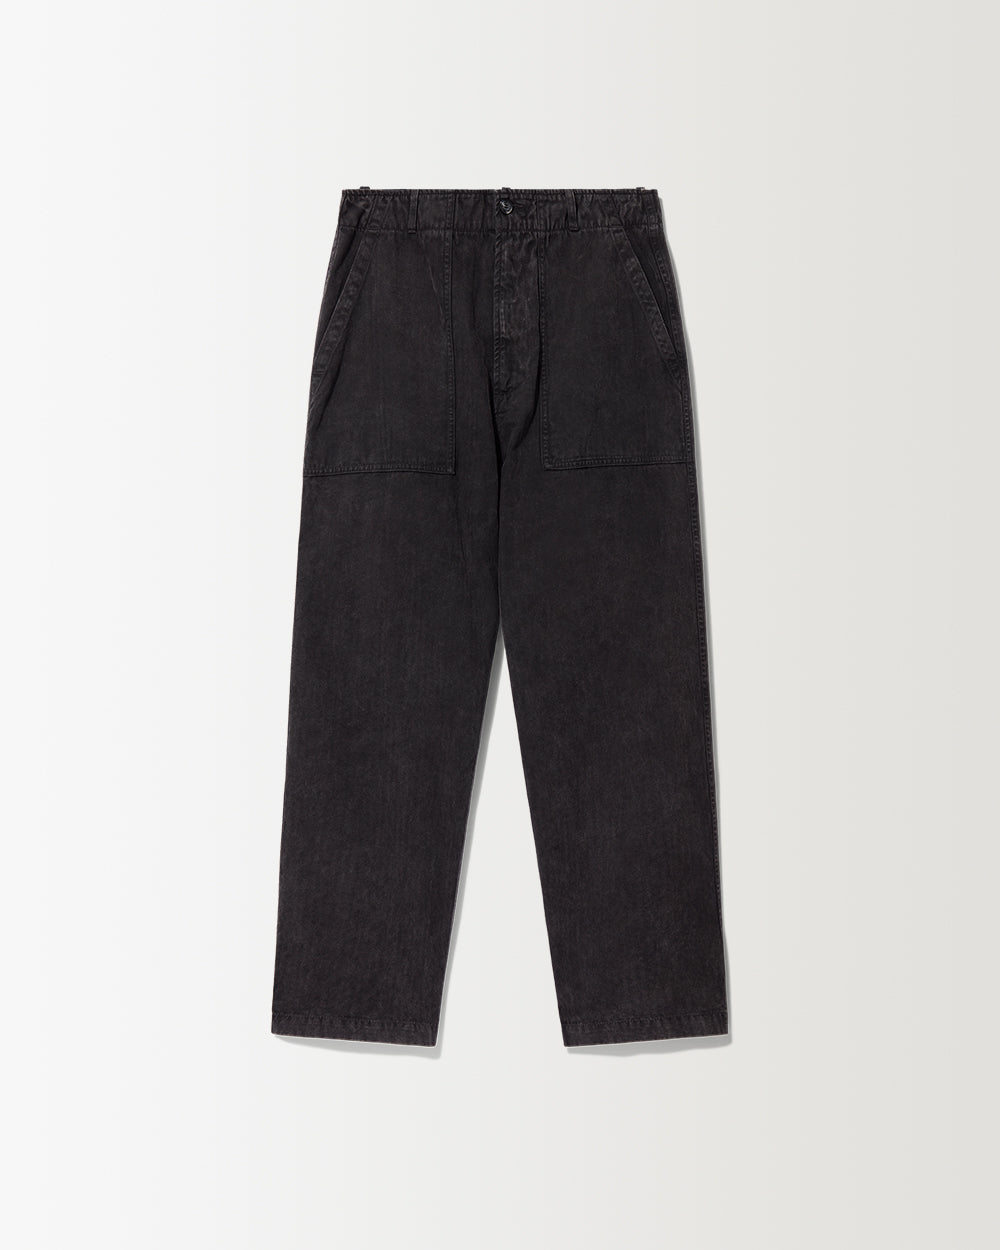 Everyday Fatigue Pant - Washed Black